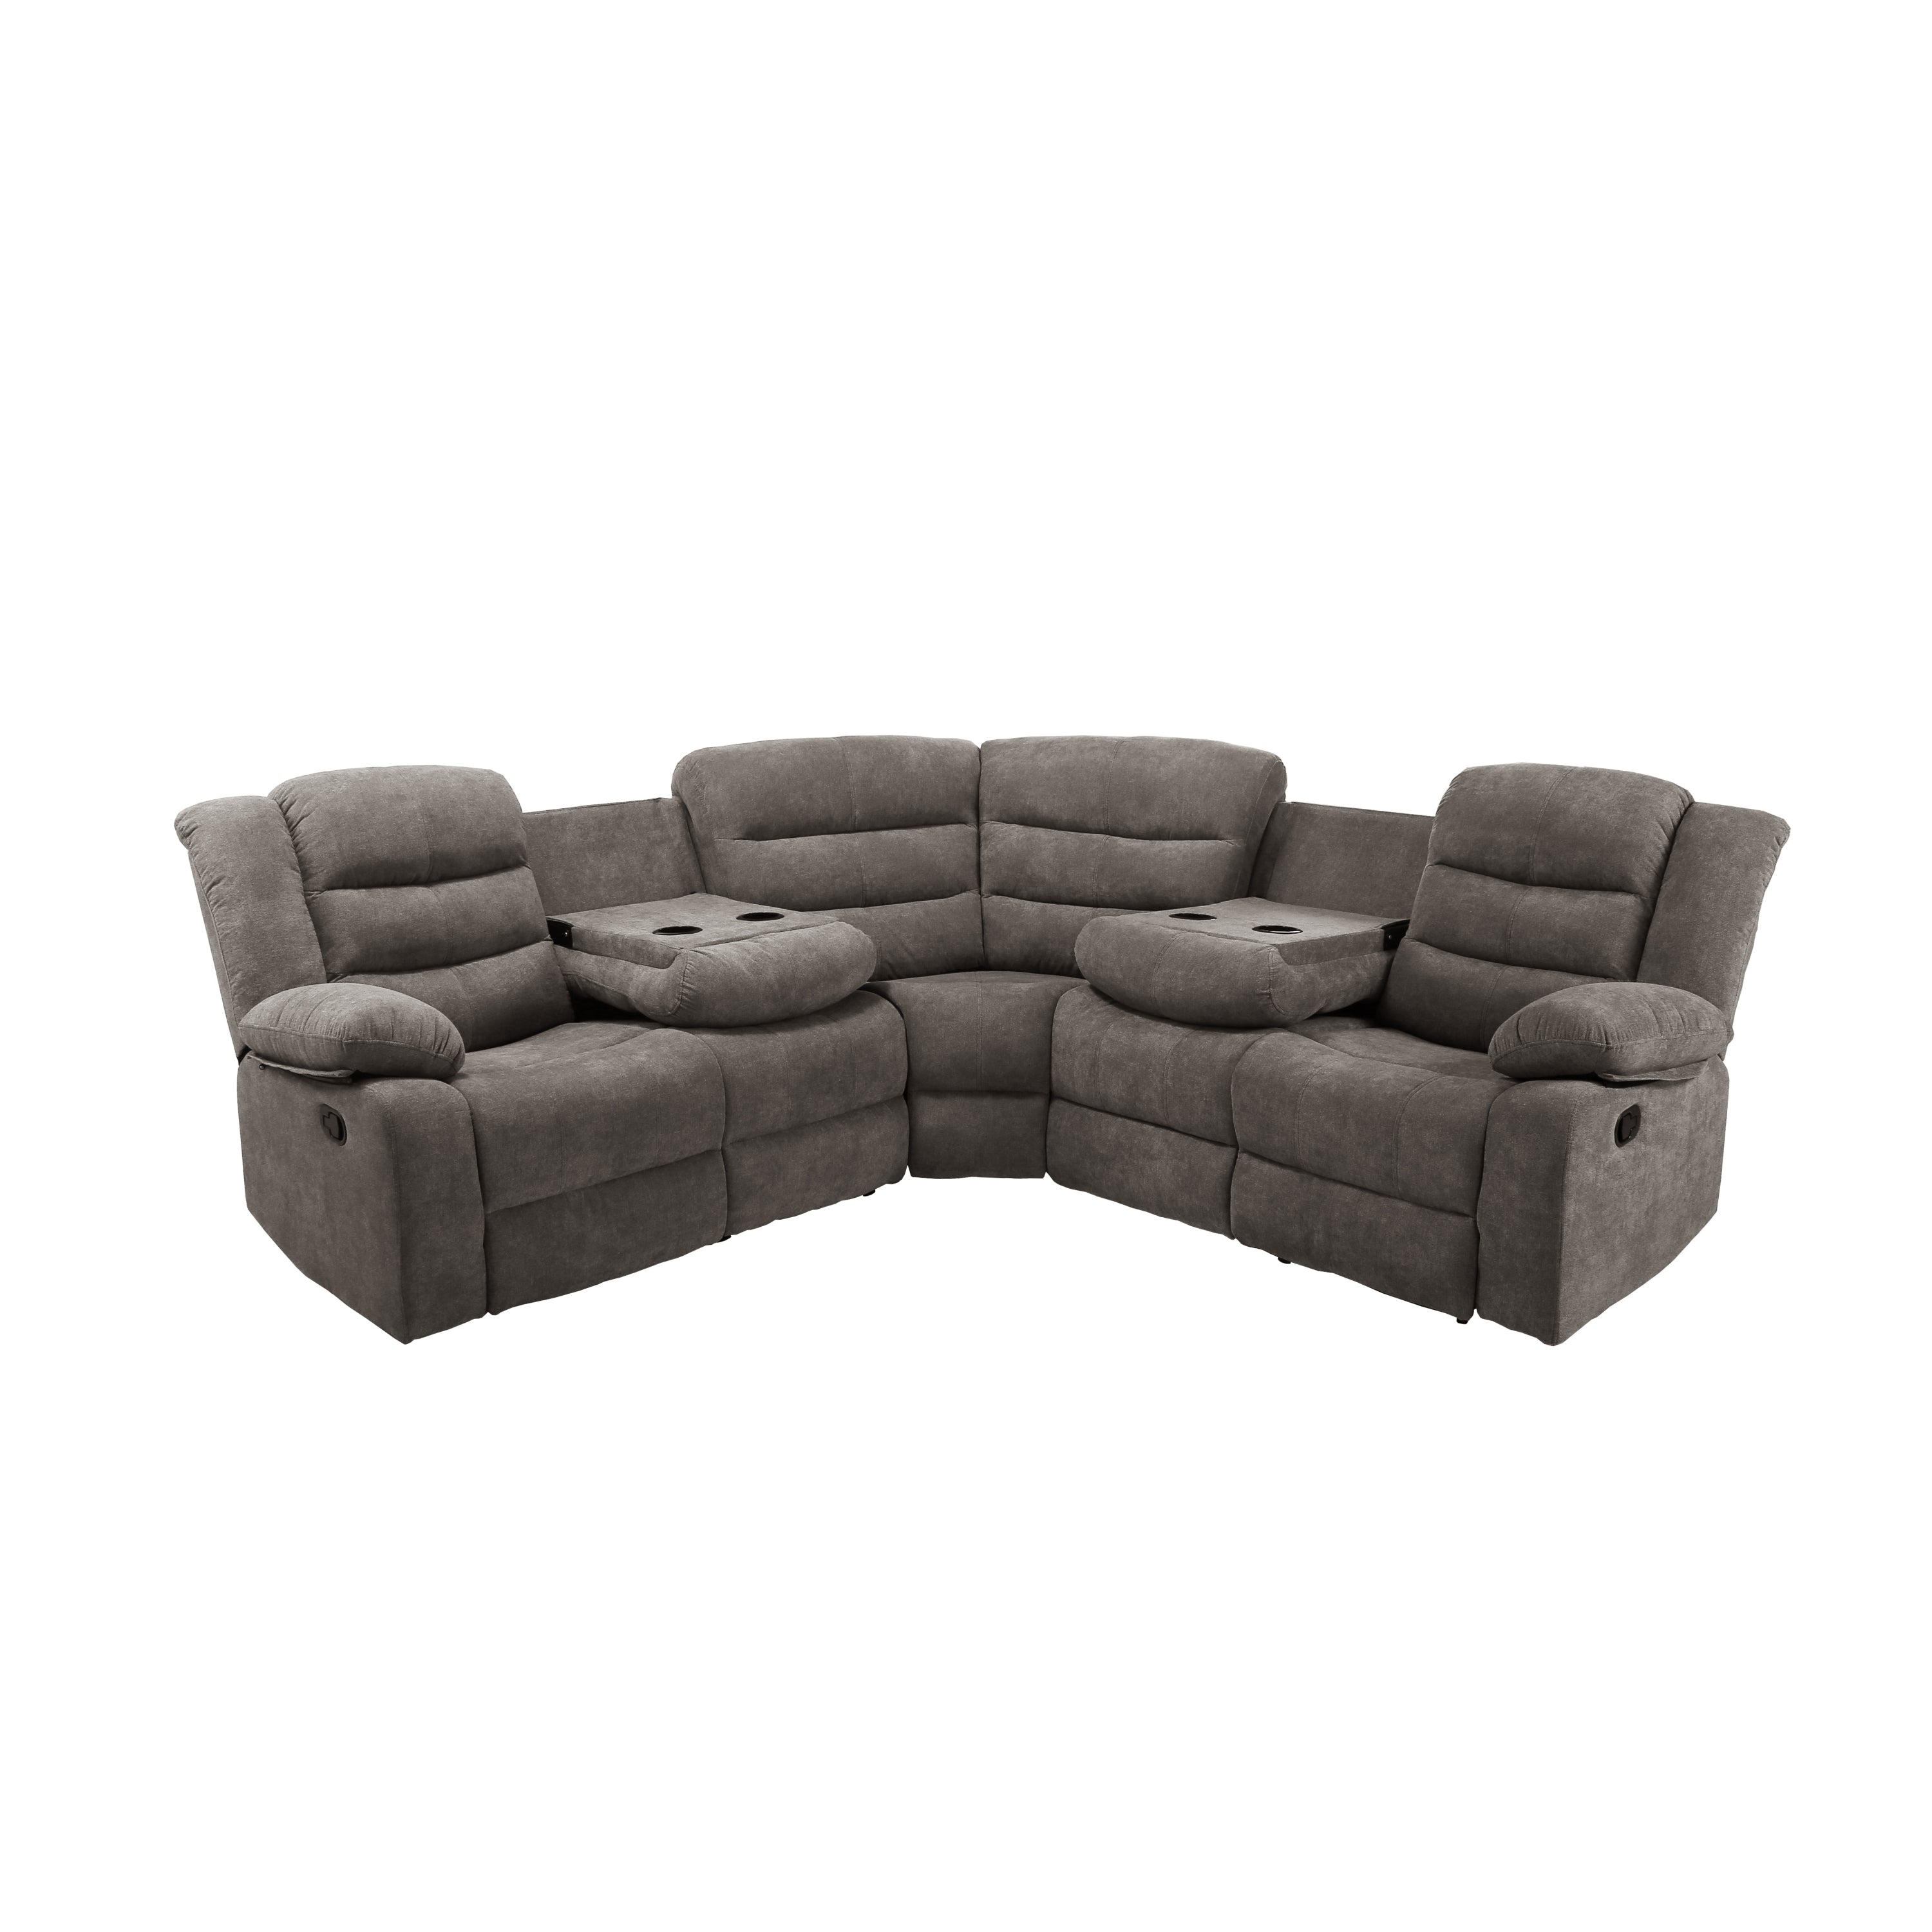 Sectional Manual Recliner Living Room Set (Gray)